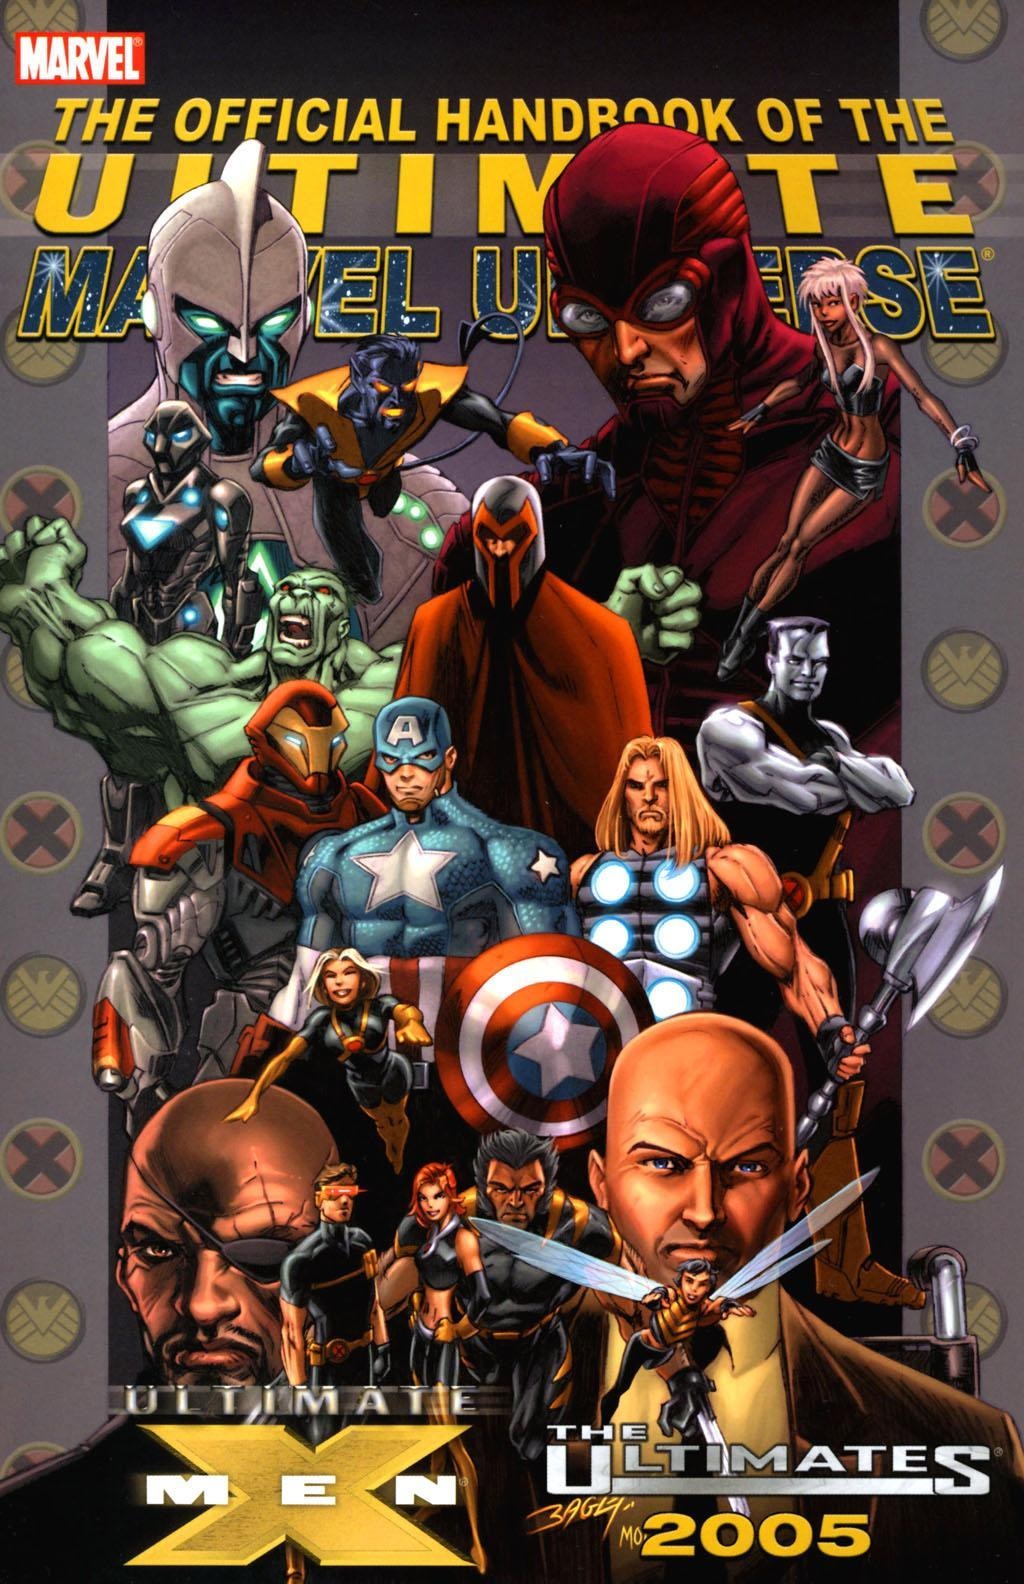 The Ultimate Marvel Universe